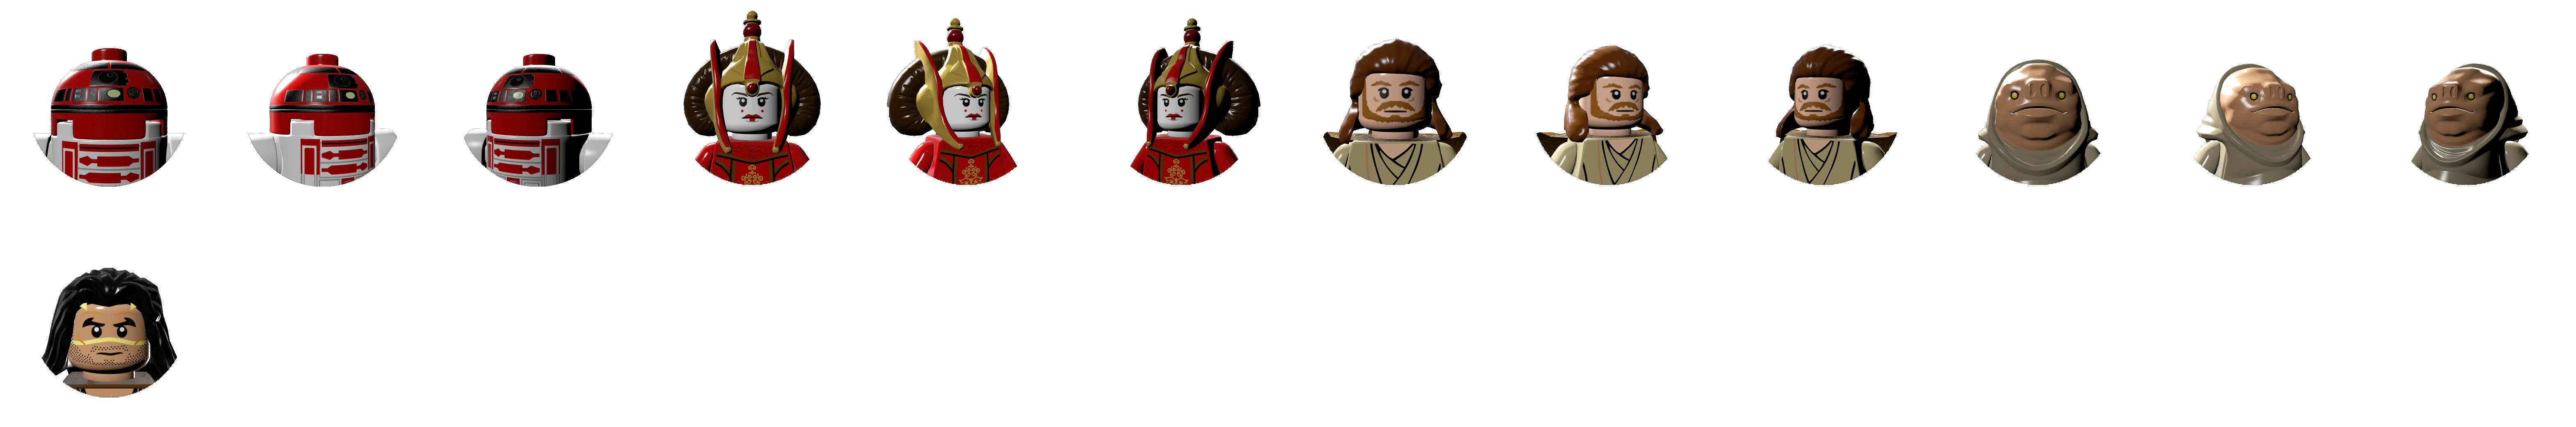 LEGO Star Wars: The Force Awakens - Character Icons (Q)